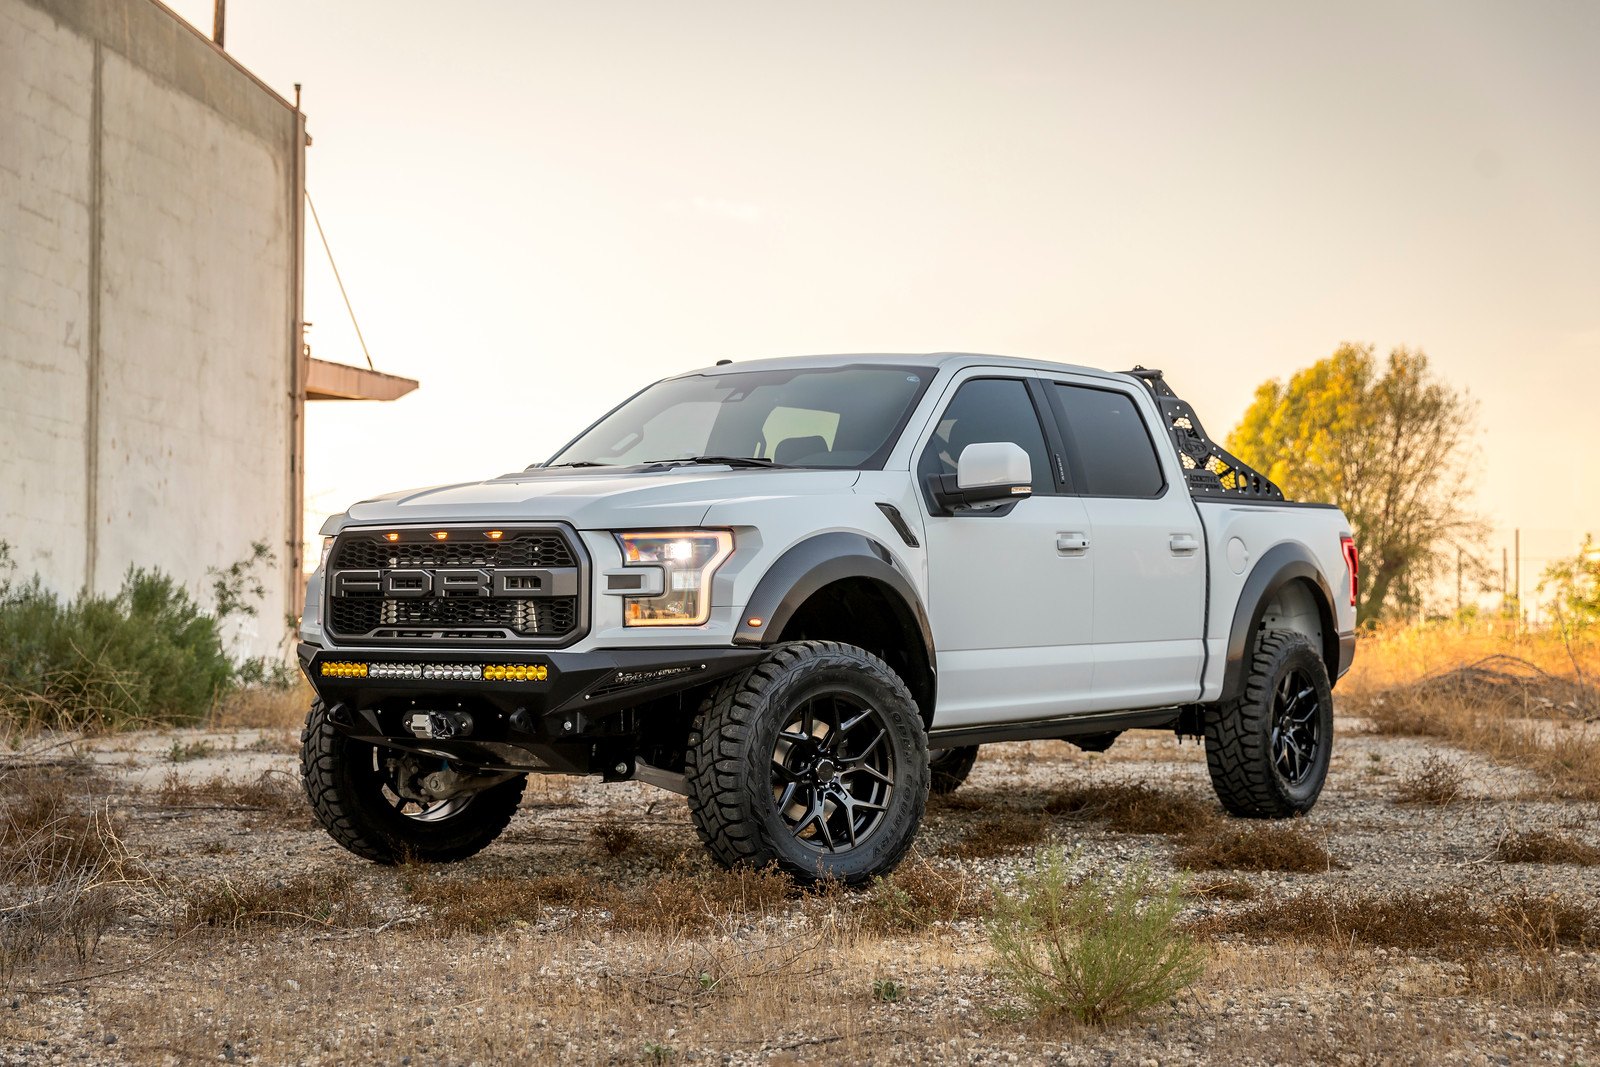 Aftermarket Projector Headlights on White Lifted Ford F-150 - Photo by Venom Rex